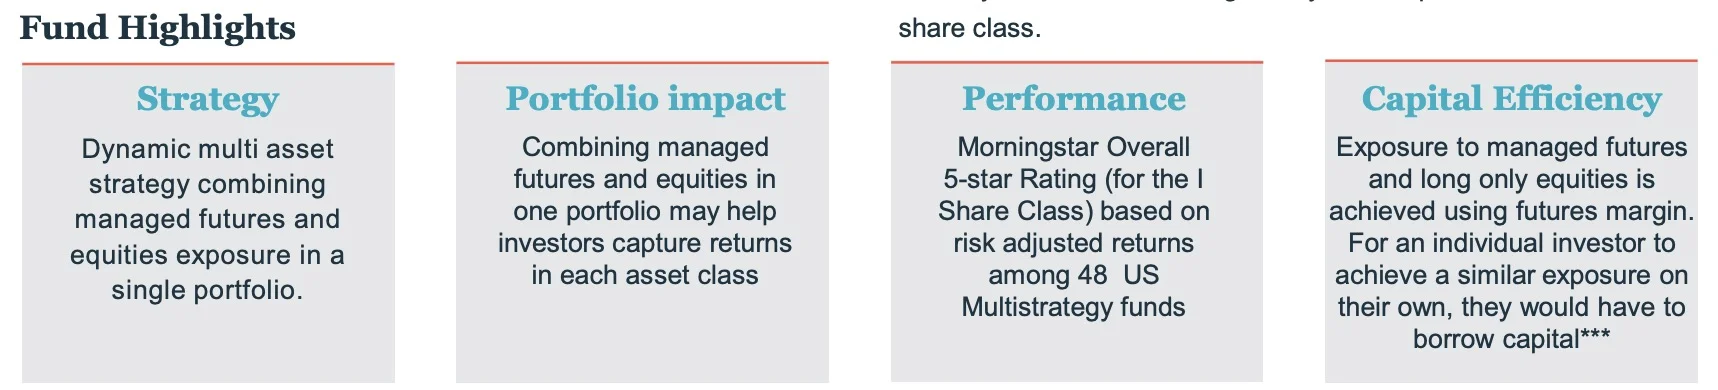 MAFIX Mutual Fund Abbey Capital Multi Strategy fund highlights include portfolio impact, performance and capital efficiency 